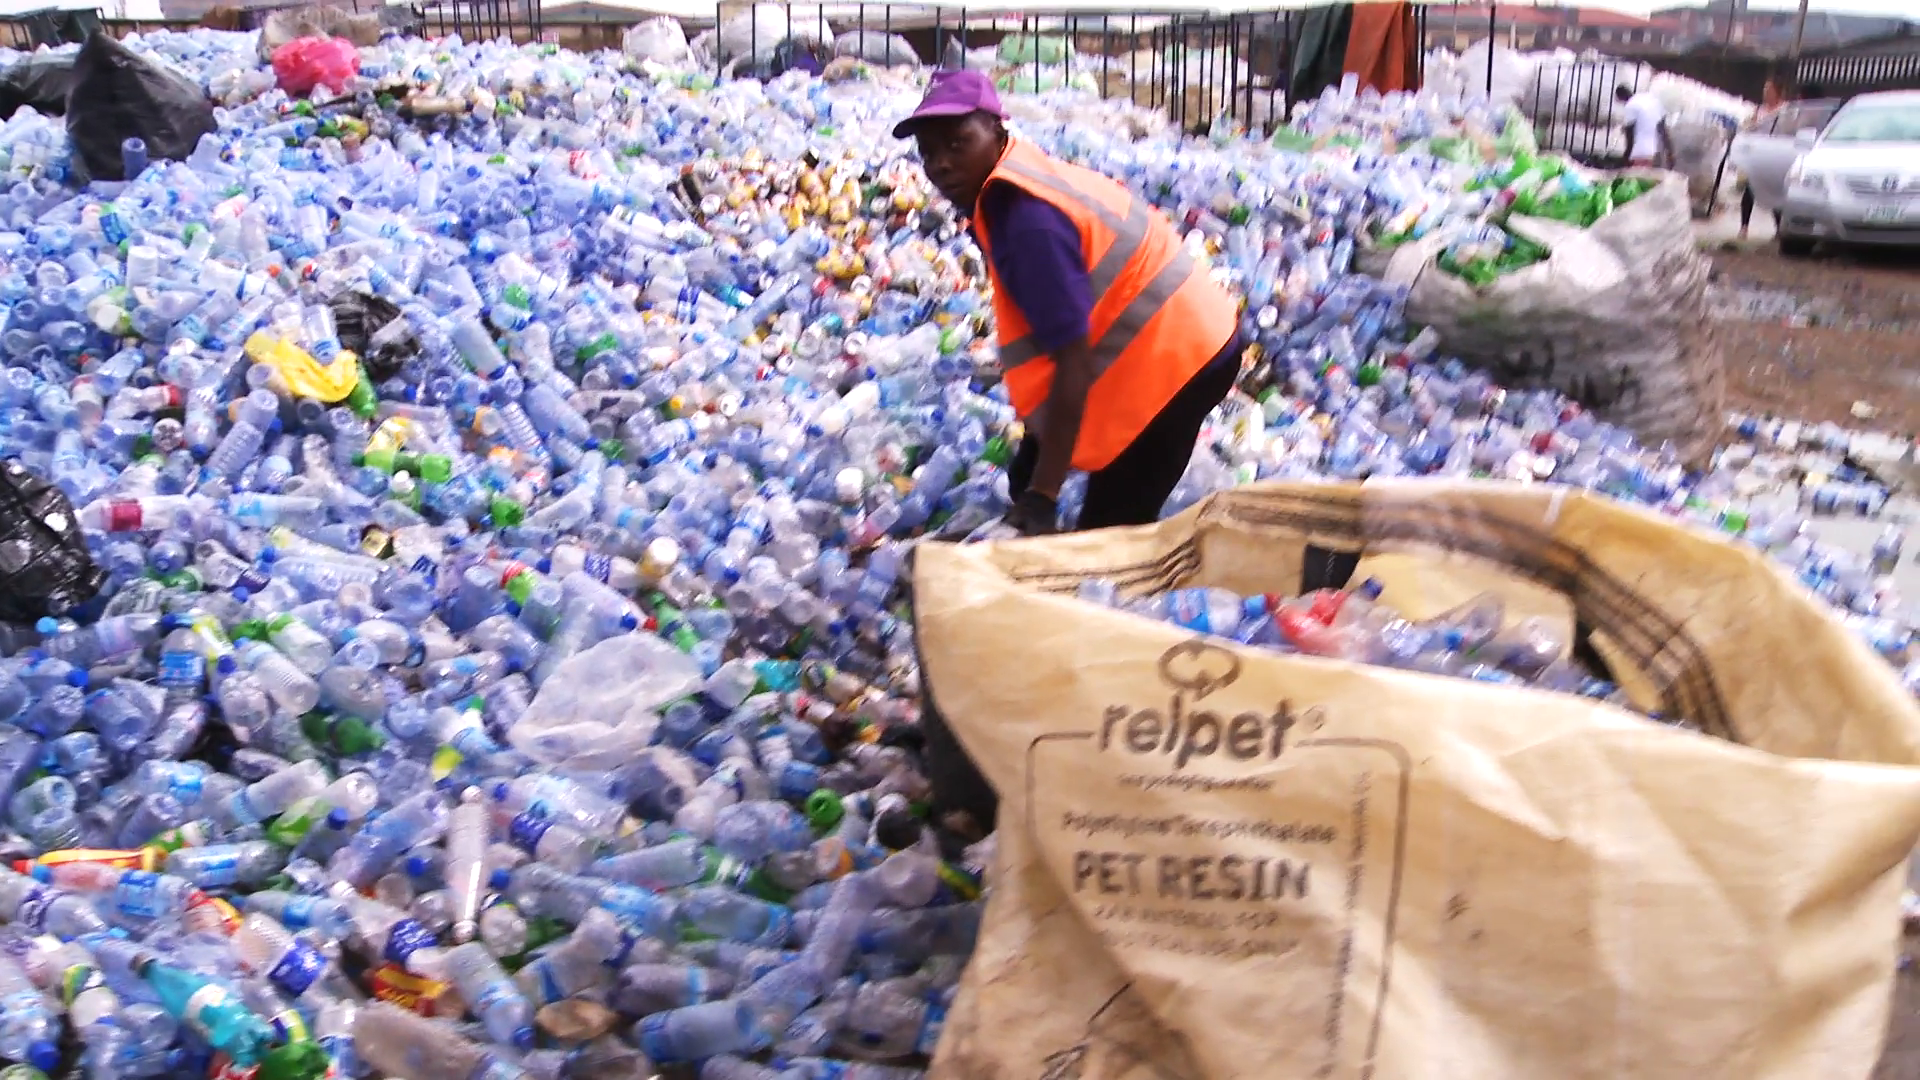 waste collection for recycling in Africa - www.videoblocks.com